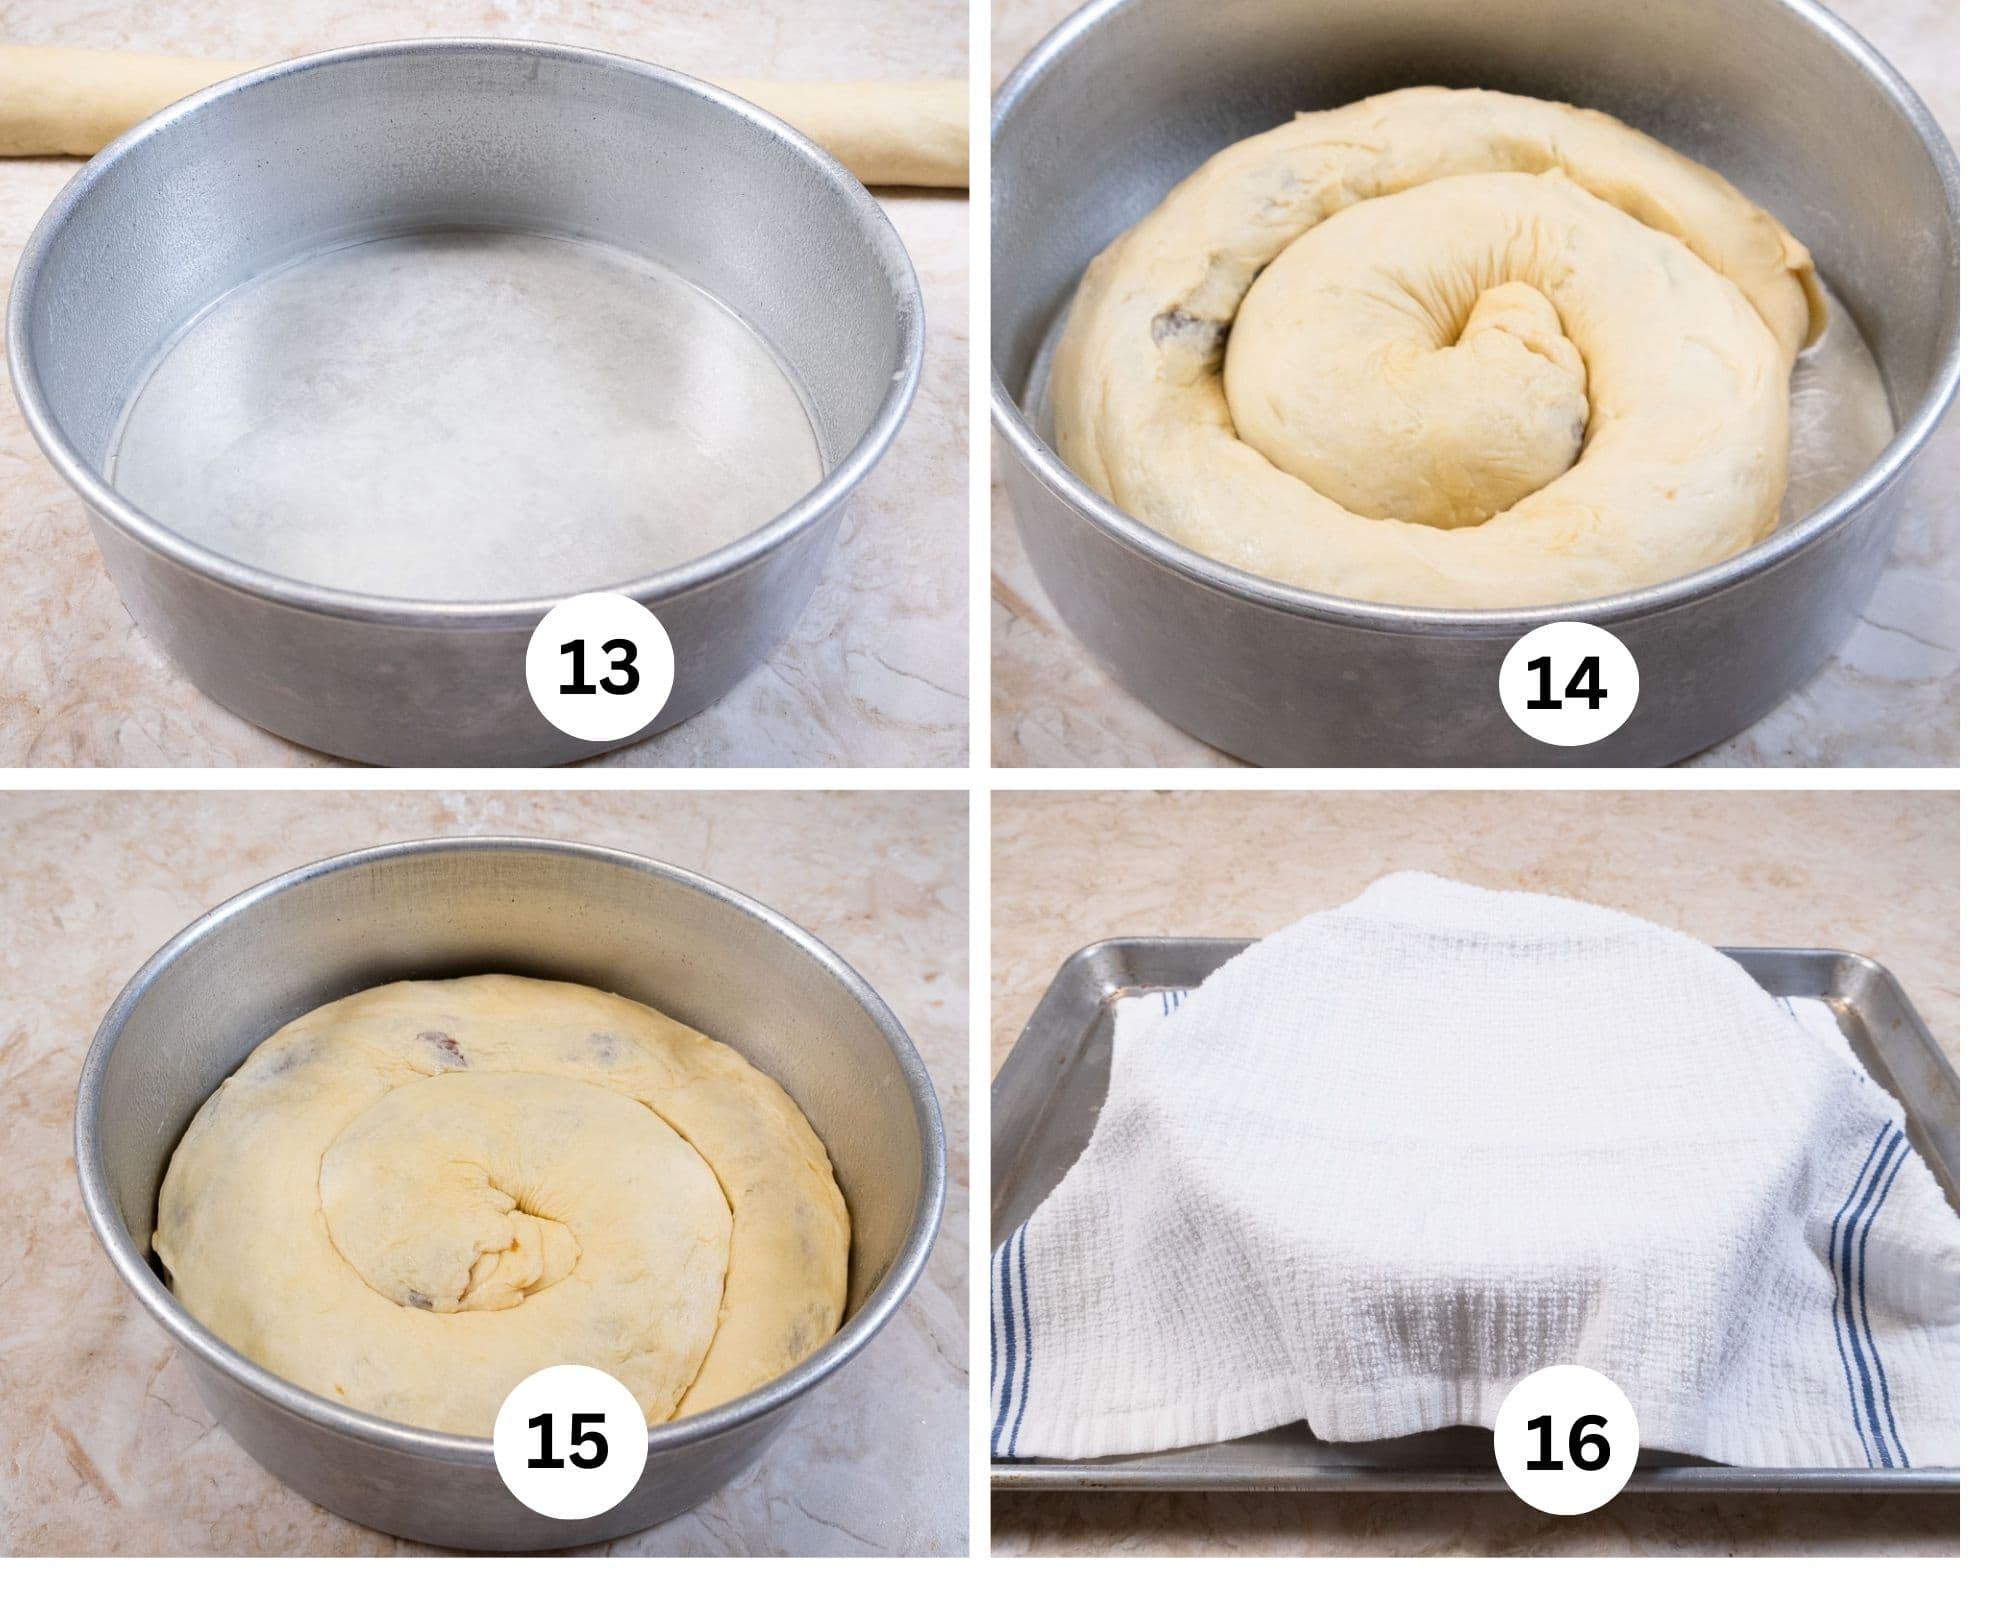 This fourth collage shows the cheesecake pan, the filled coffee cake coiled in the pan, then pressed down and a towel covering the pan.